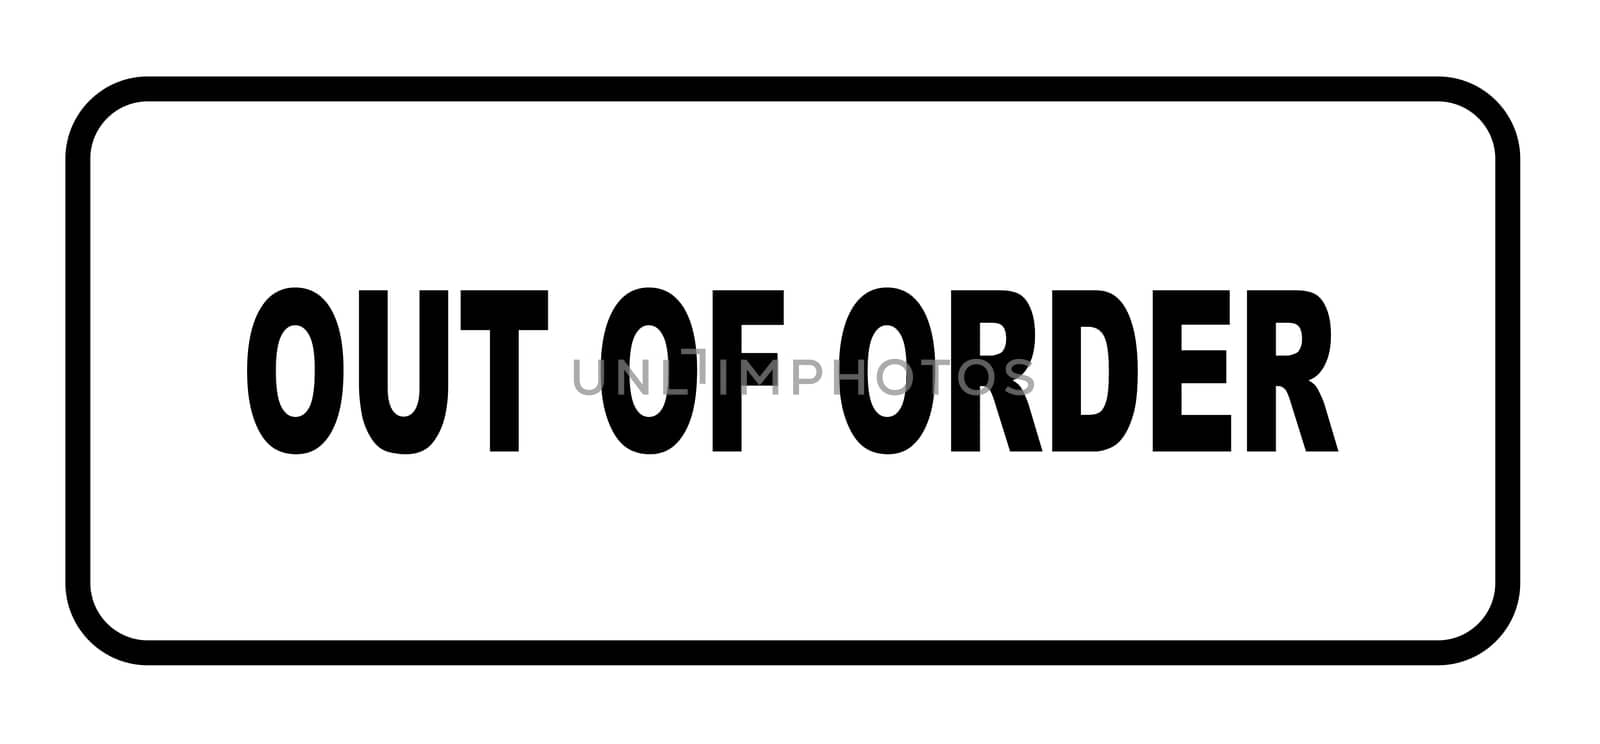 An out of order sign over a white background